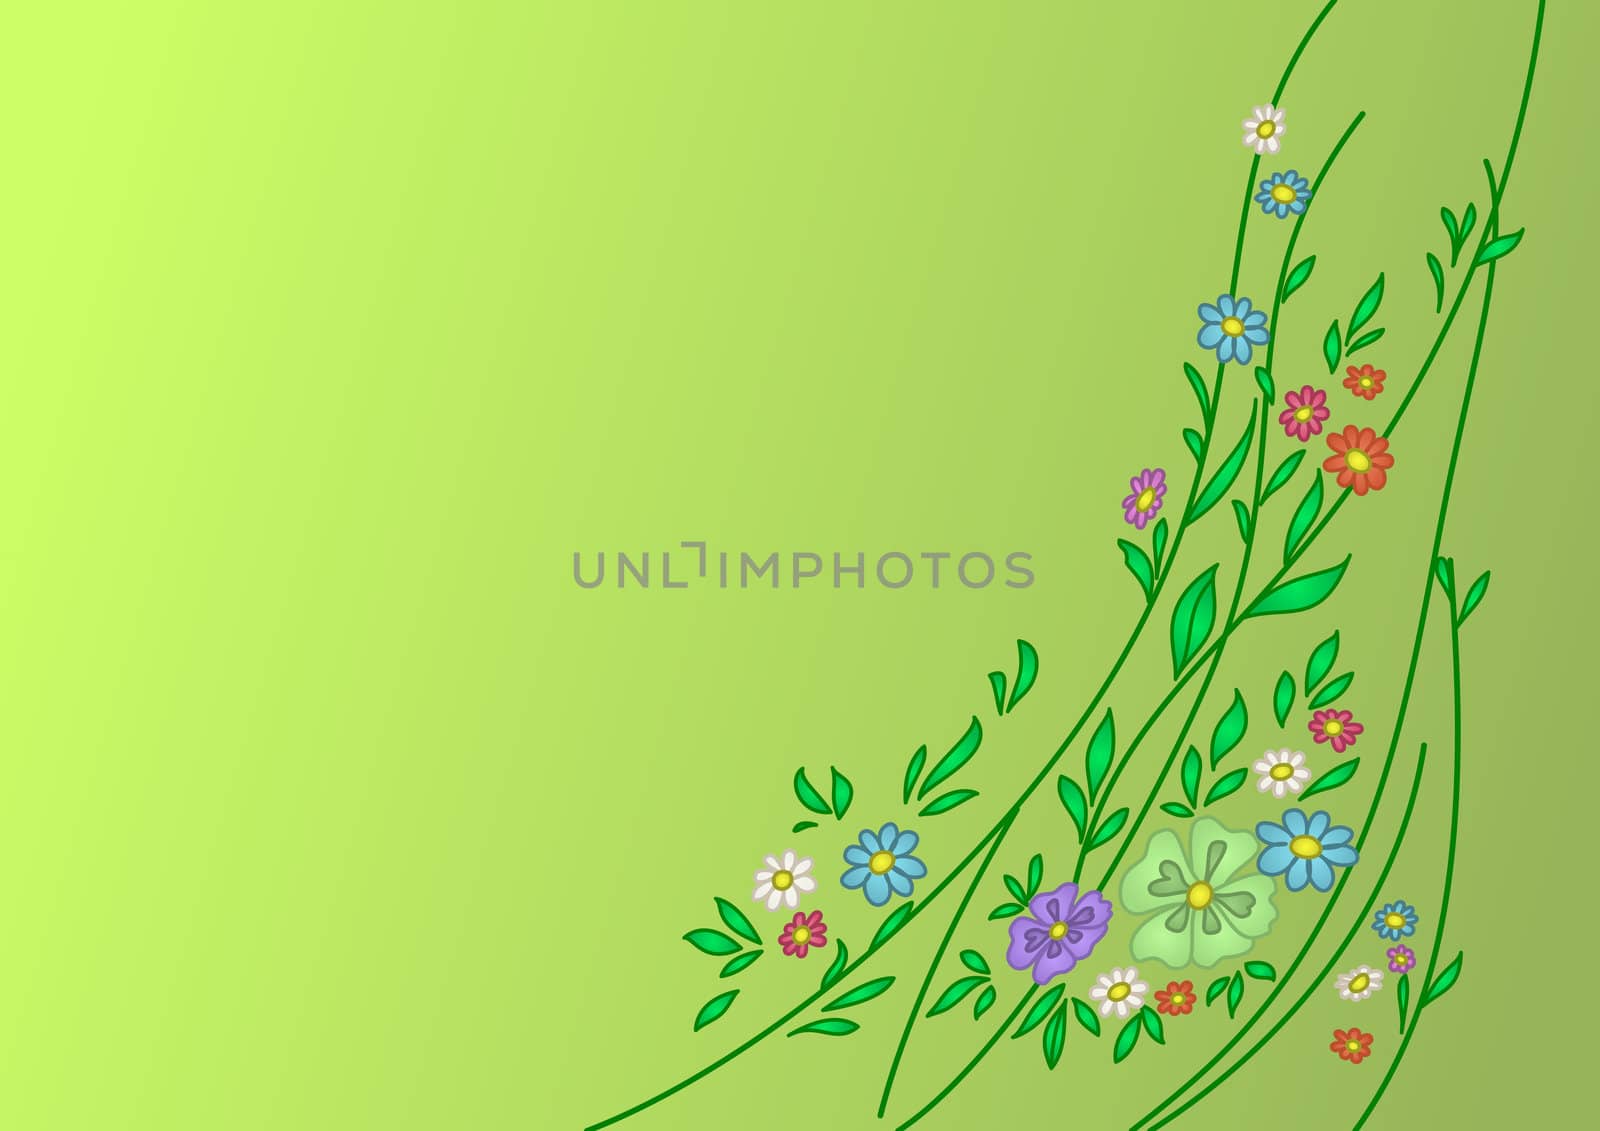 Abstract background: lianas with leaves and flowers on a green